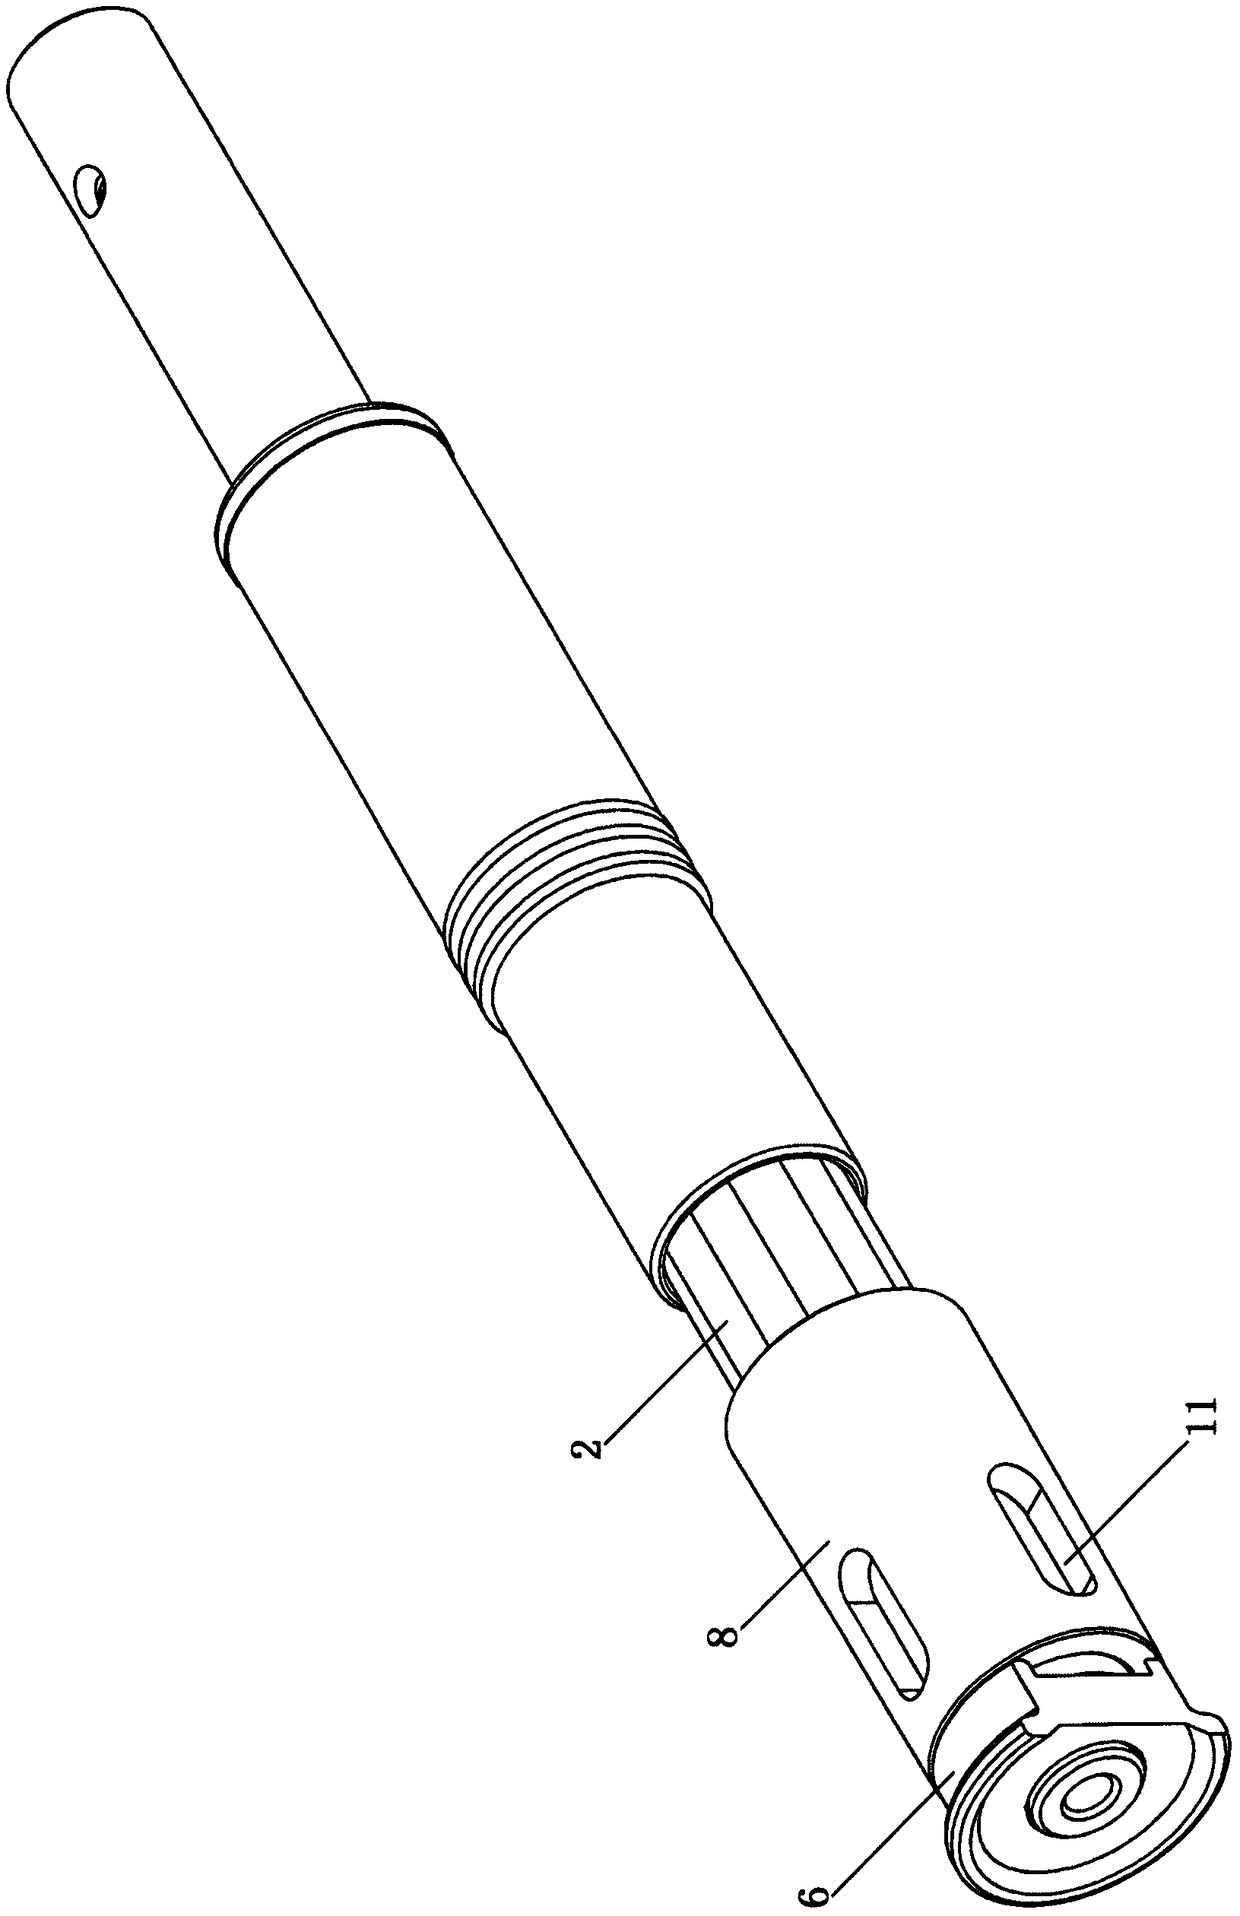 Heat-insulating and dustproof nail shooting device